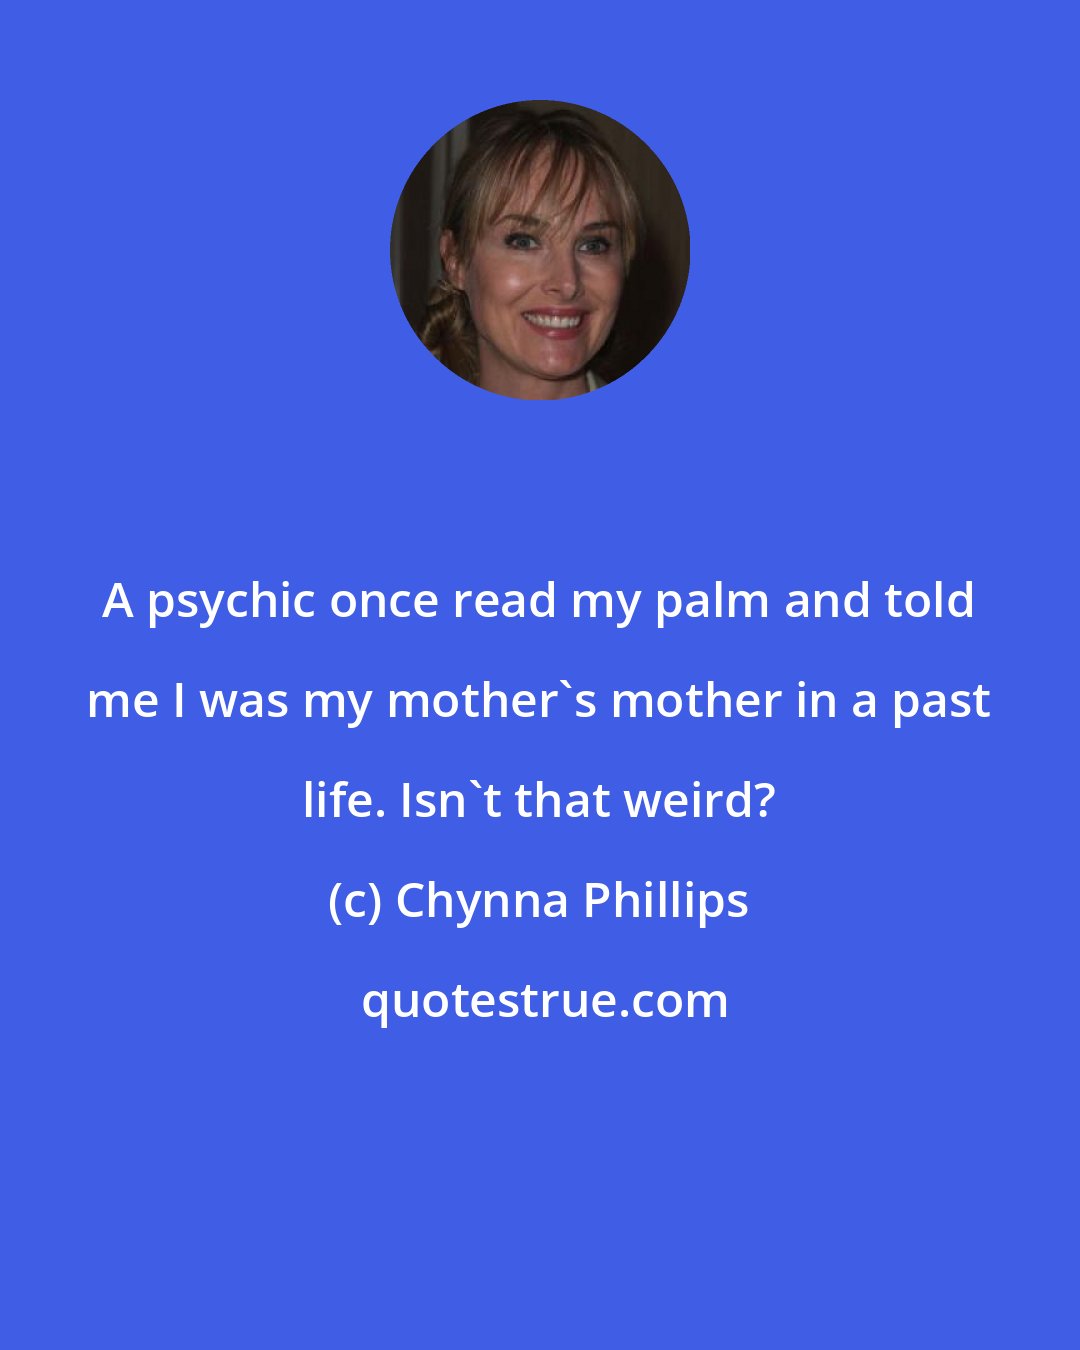 Chynna Phillips: A psychic once read my palm and told me I was my mother's mother in a past life. Isn't that weird?